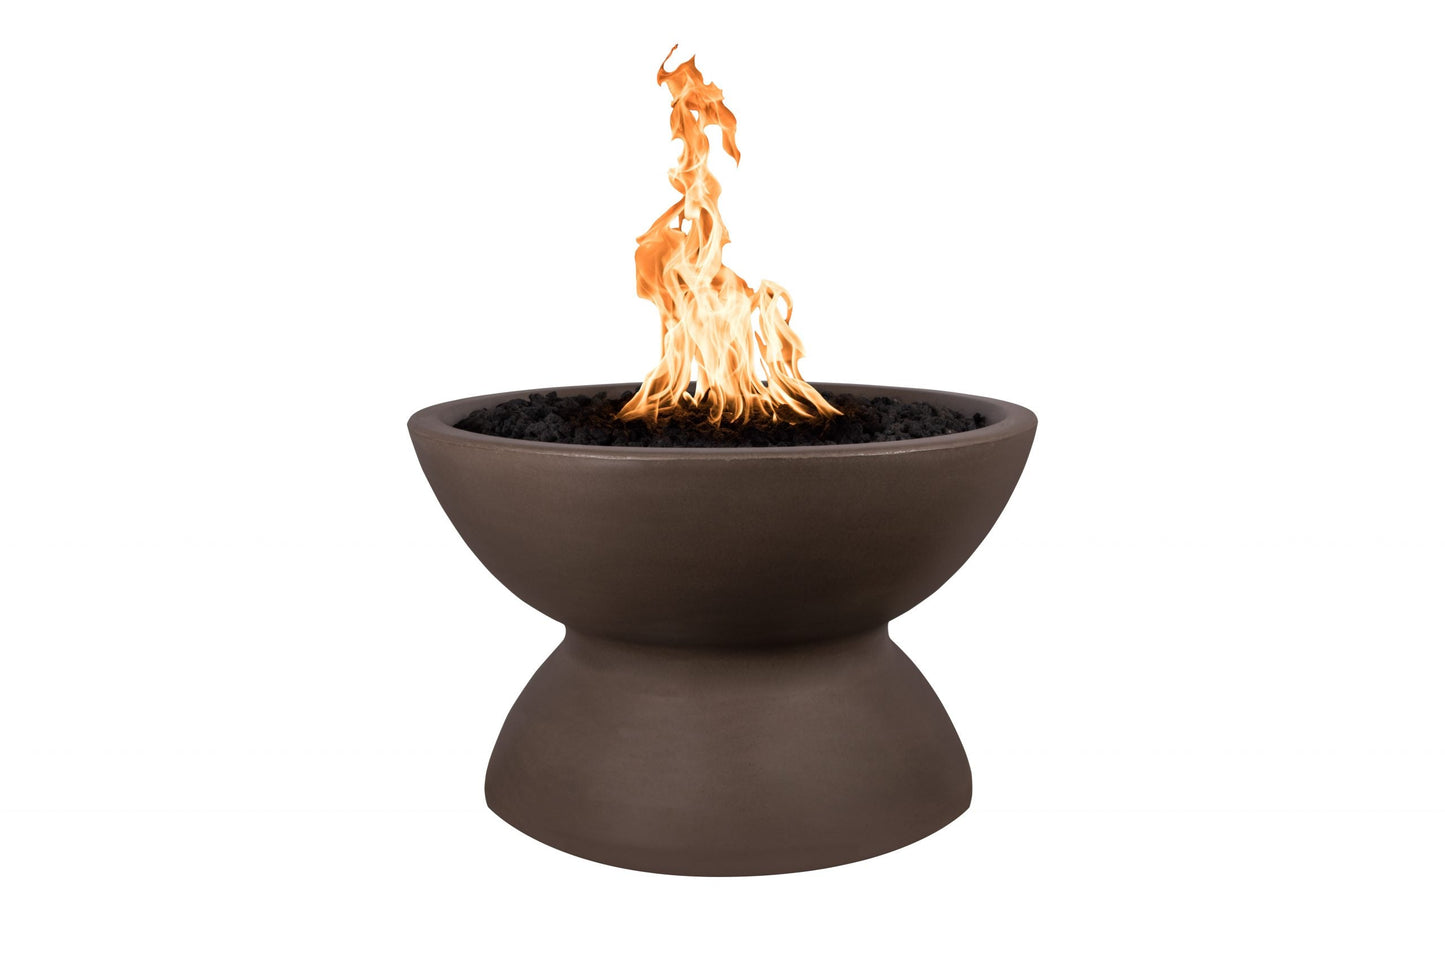 The Outdoor Plus Round Copa 33" Black GFRC Concrete Natural Gas Fire Pit with 110V Electronic Ignition